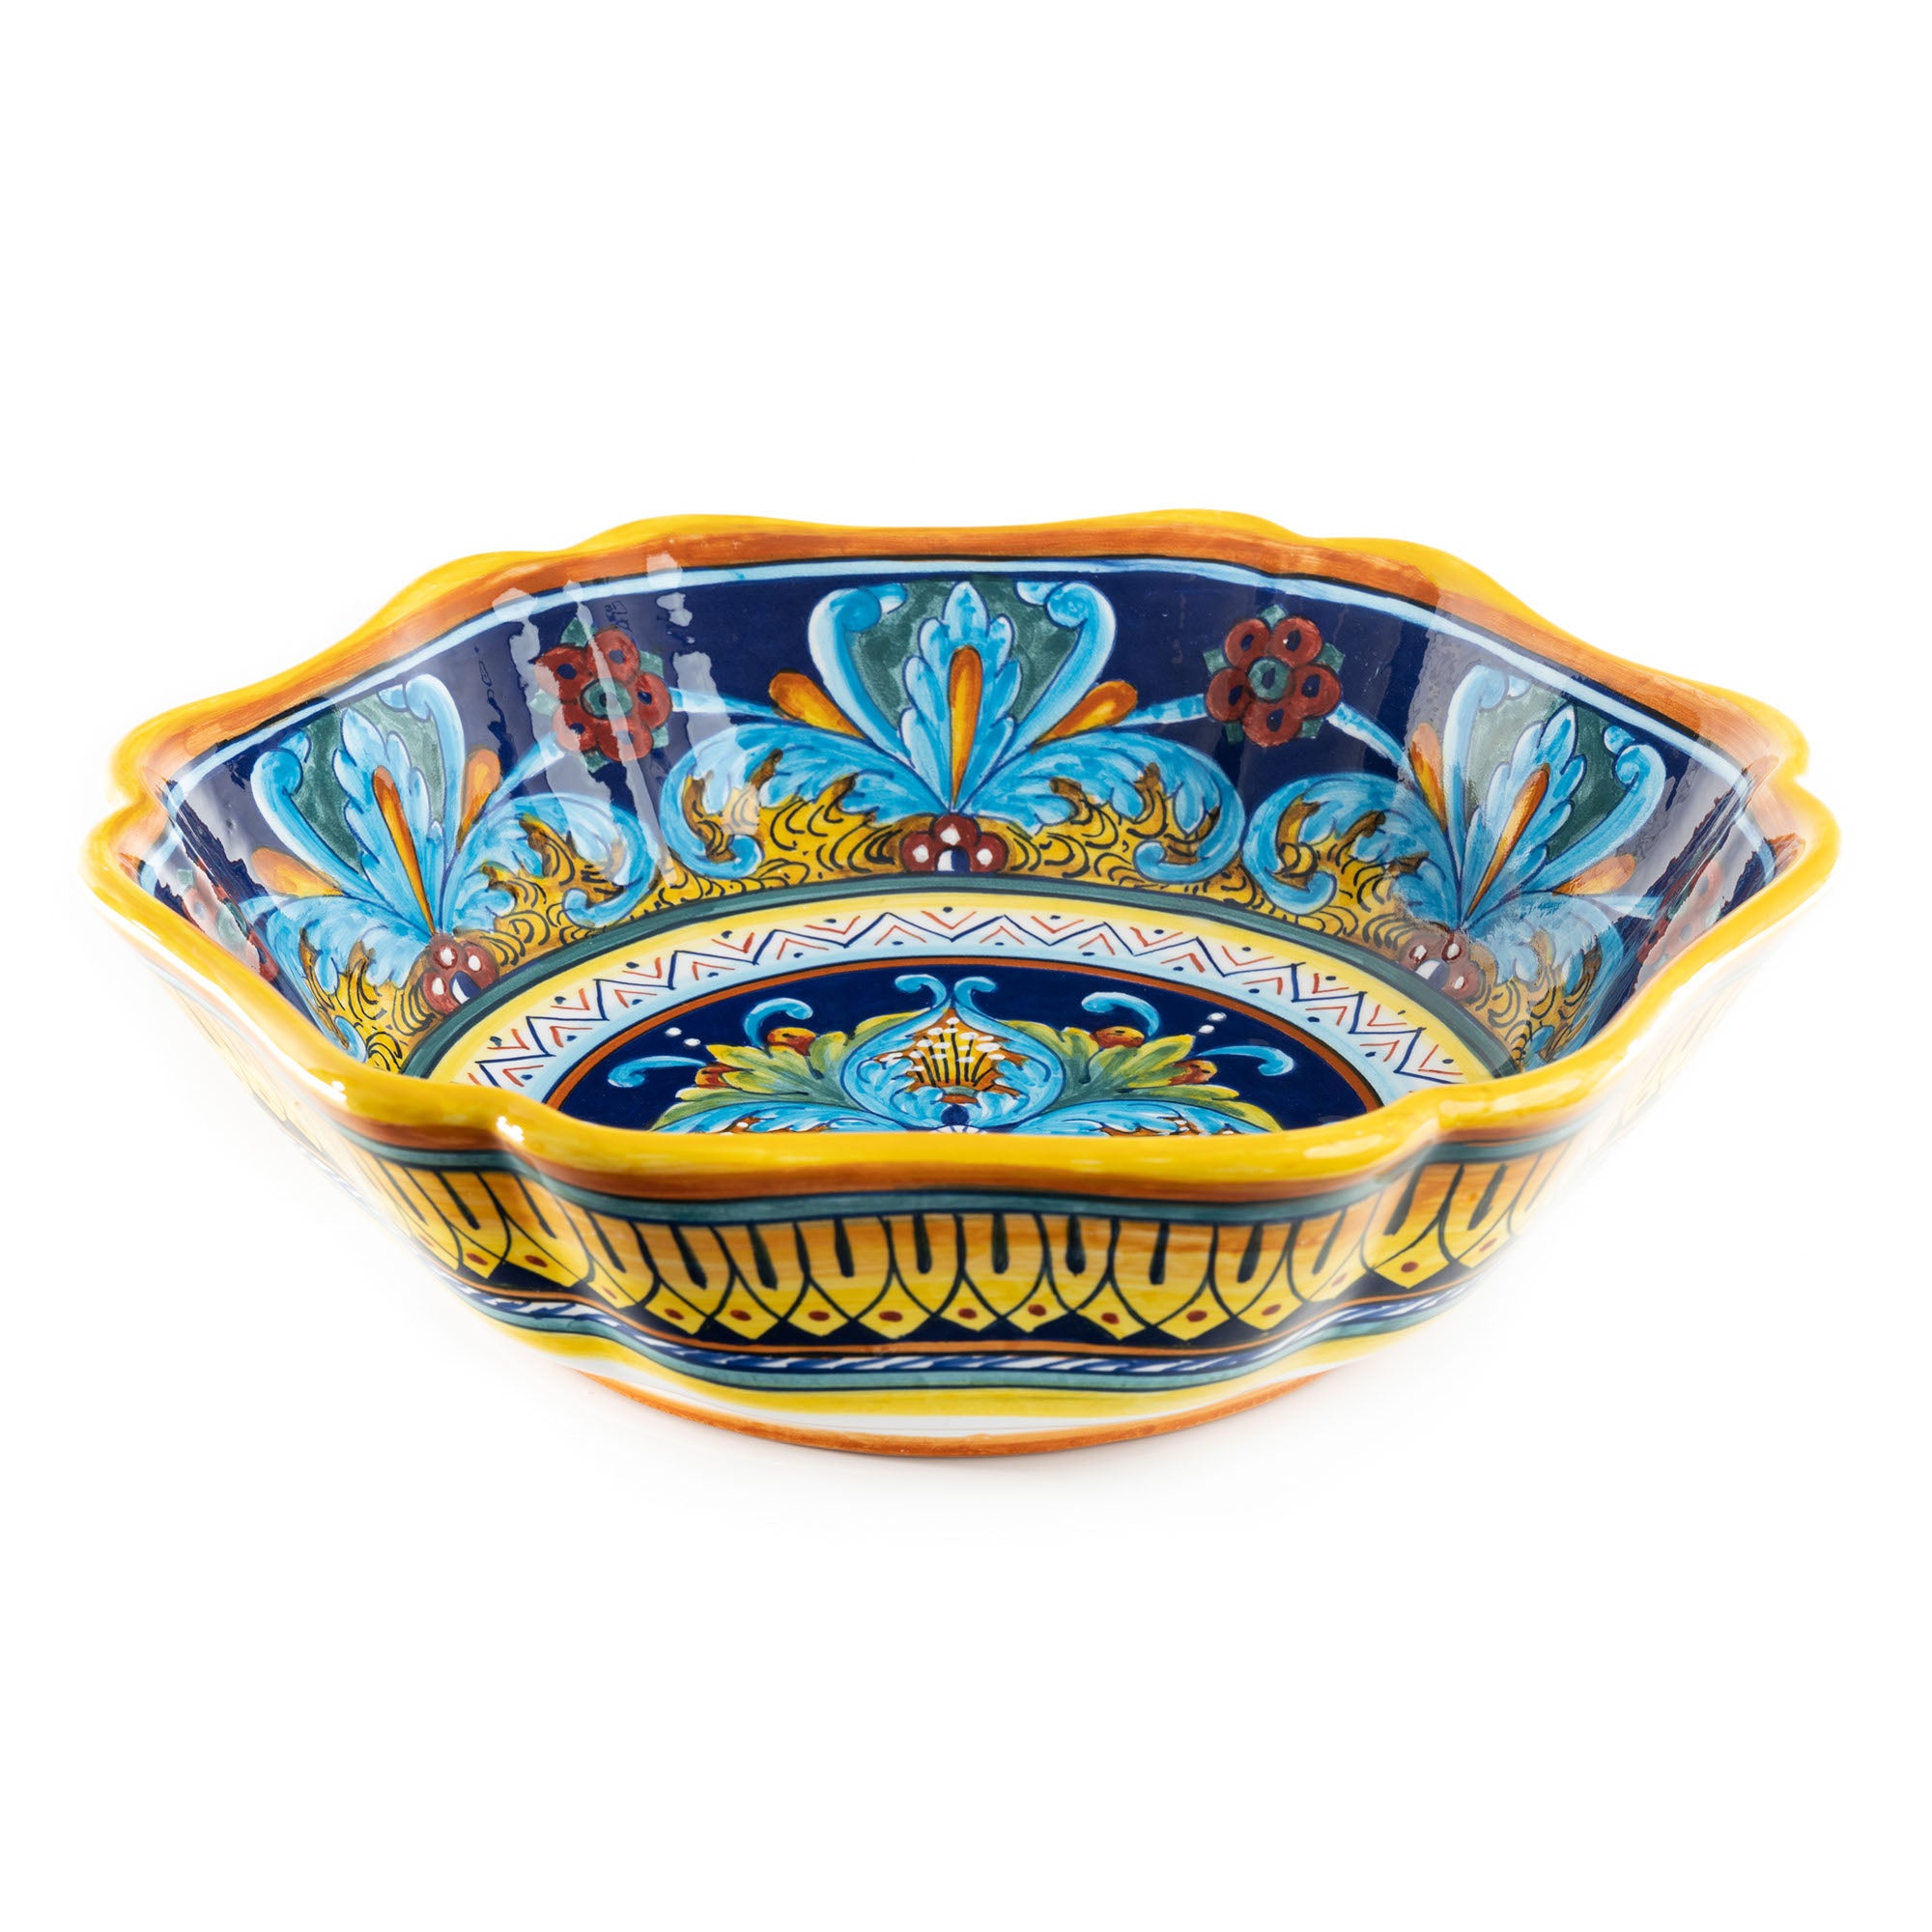 Collectible Majolica Scallop Bowl, B-64 Pattern, ceramics, pottery, italian design, majolica, handmade, handcrafted, handpainted, home decor, kitchen art, home goods, deruta, majolica, Artisan, treasures, traditional art, modern art, gift ideas, style, SF, shop small business, artists, shop online, landmark store, legacy, one of a kind, limited edition, gift guide, gift shop, retail shop, decorations, shopping, italy, home staging, home decorating, home interiors